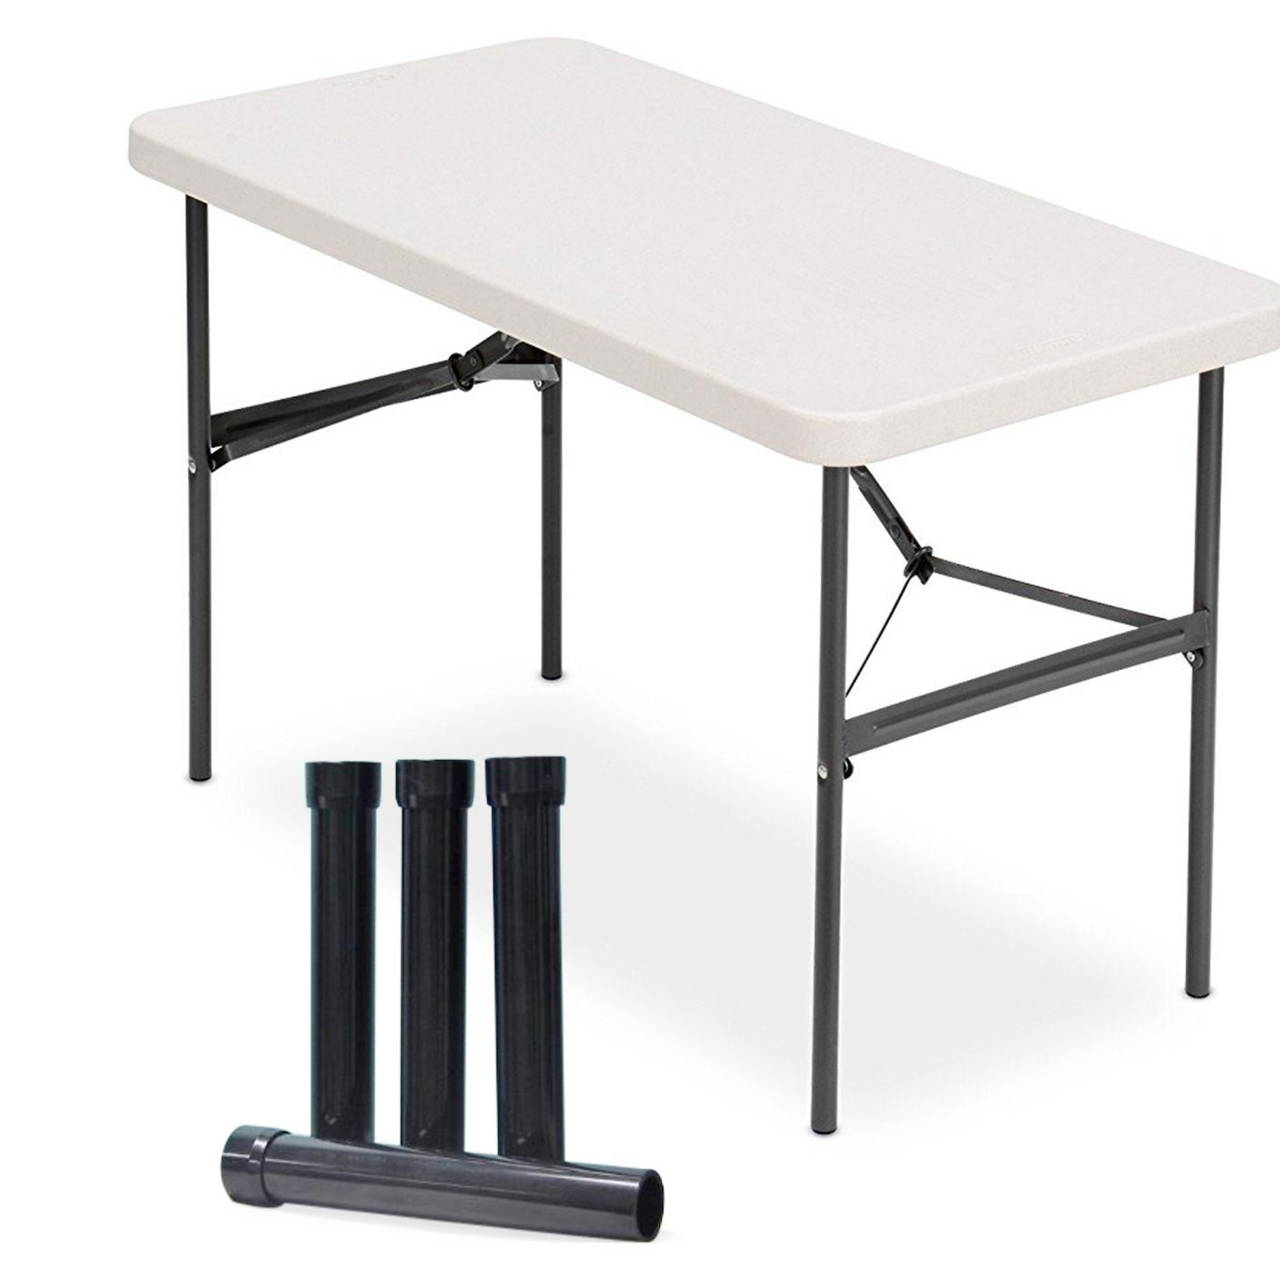 Tables and Leg Risers